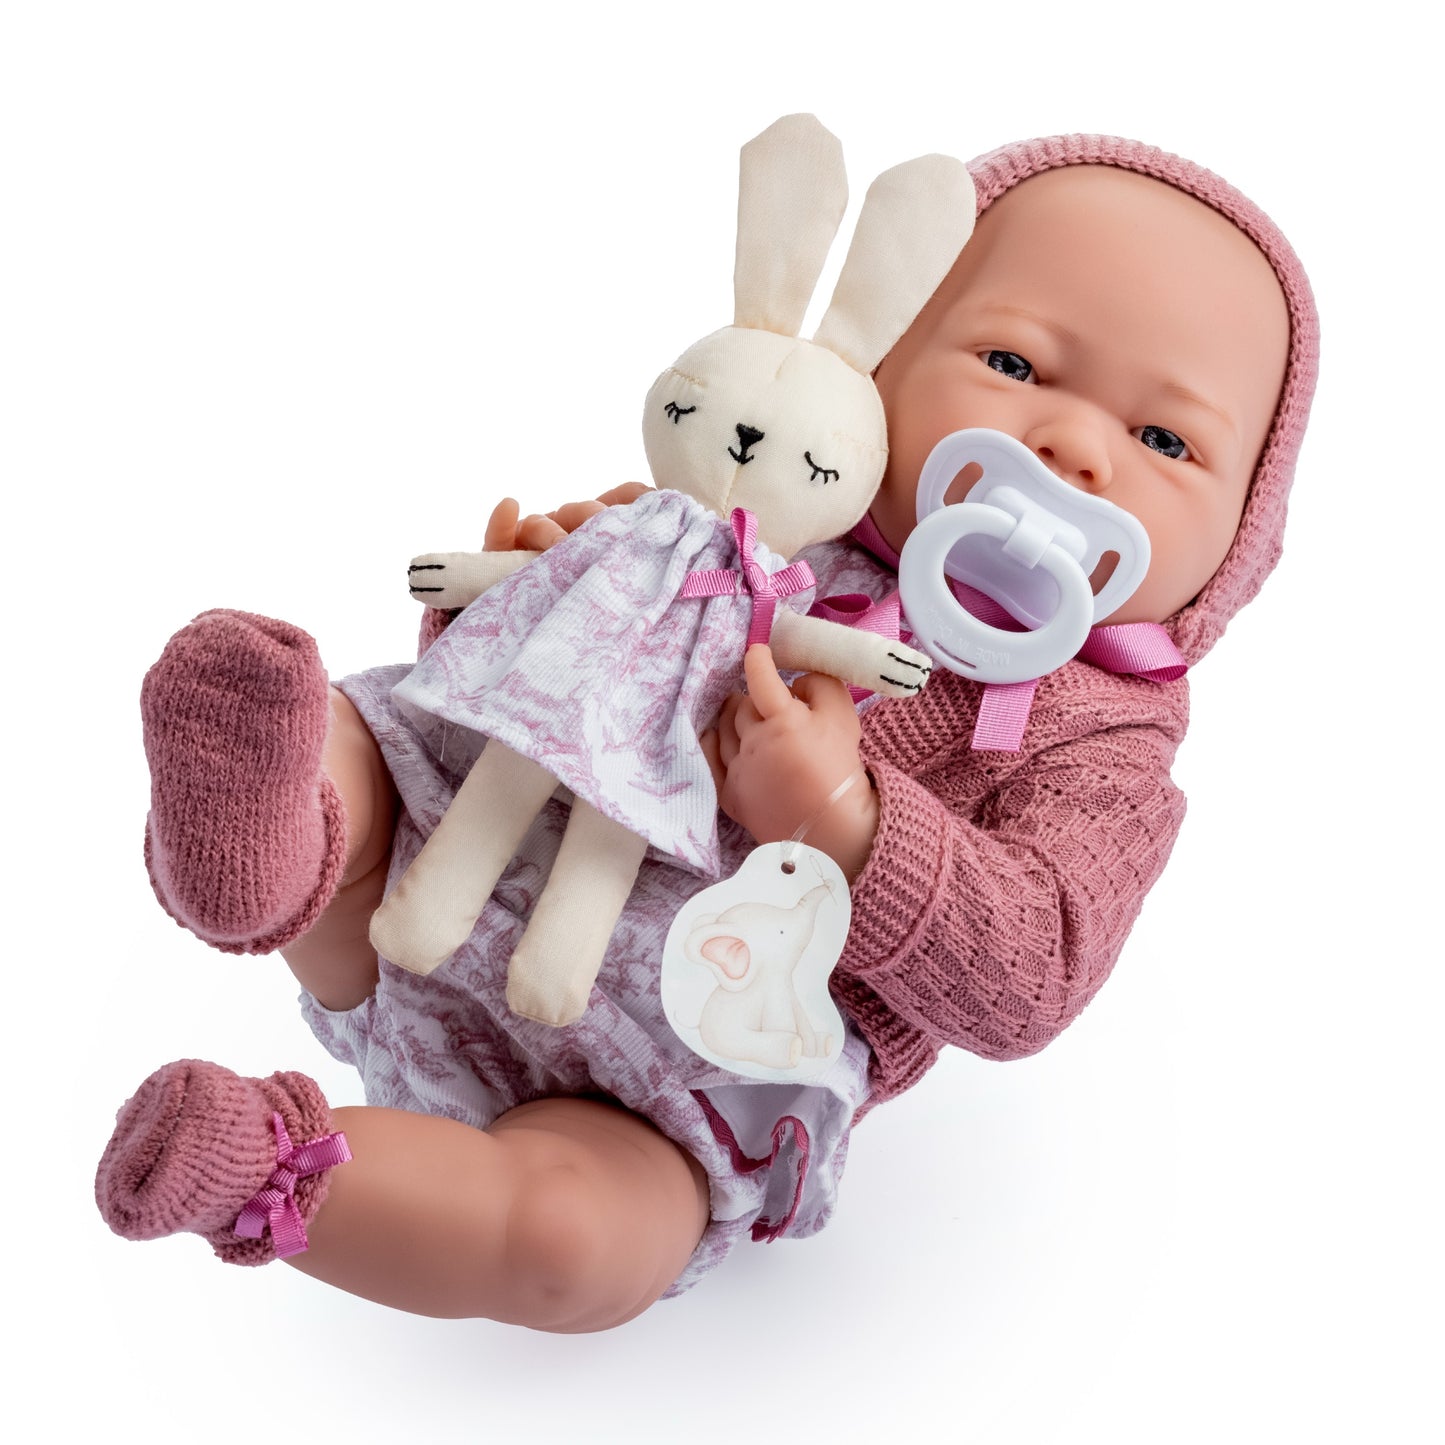 JC Toys La Newborn ROYAL Collection 15" All-Vinyl Anatomically Correct Real Girl Baby Doll Pink Gift Set Ages 2+